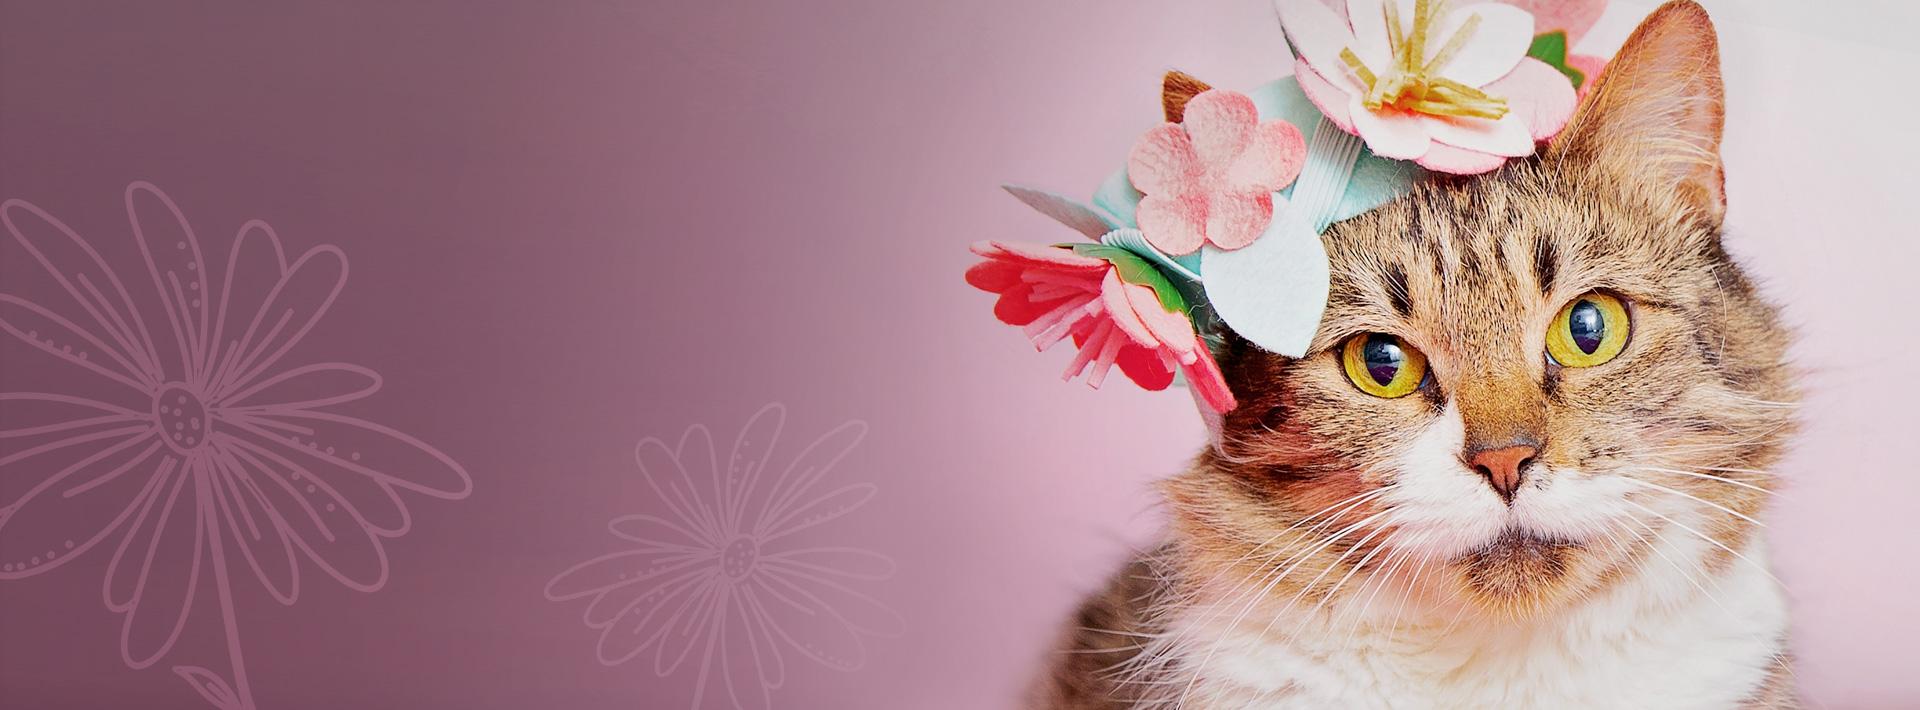 Cat wearing flowers on top of its head